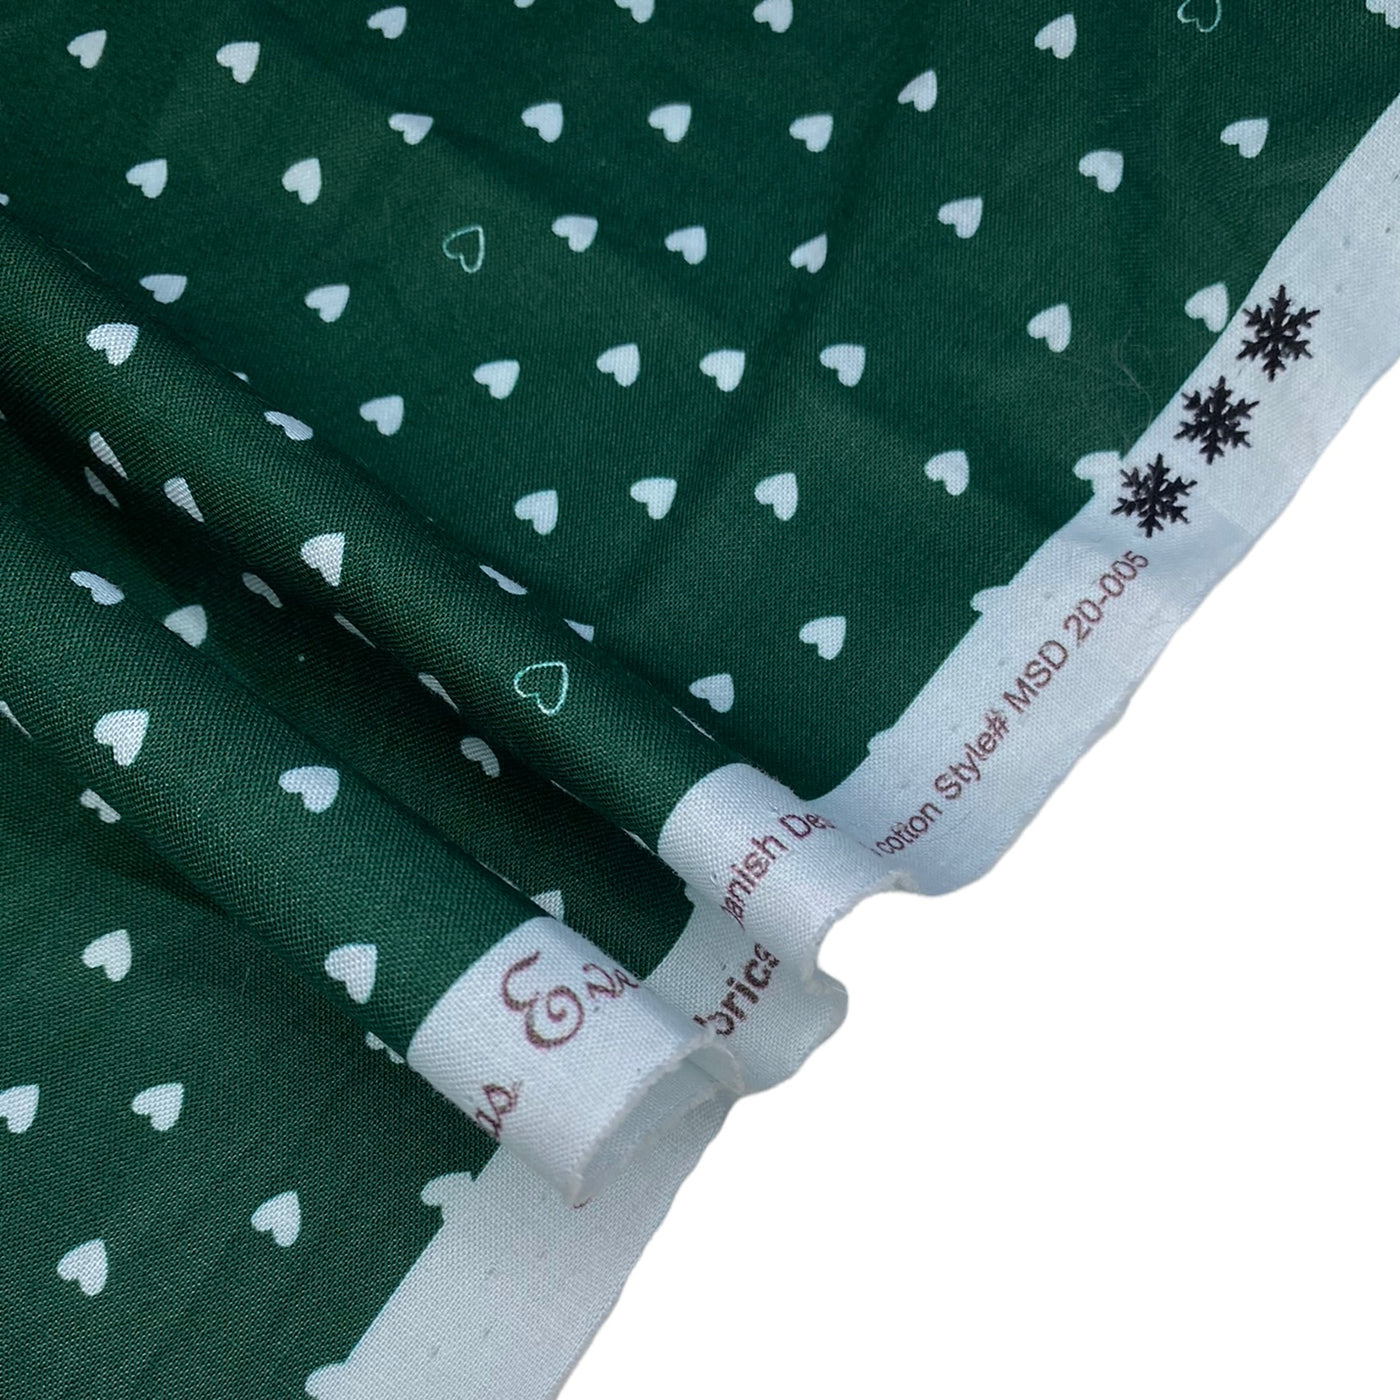 Quilting Cotton - Little Christmas Hearts - Green